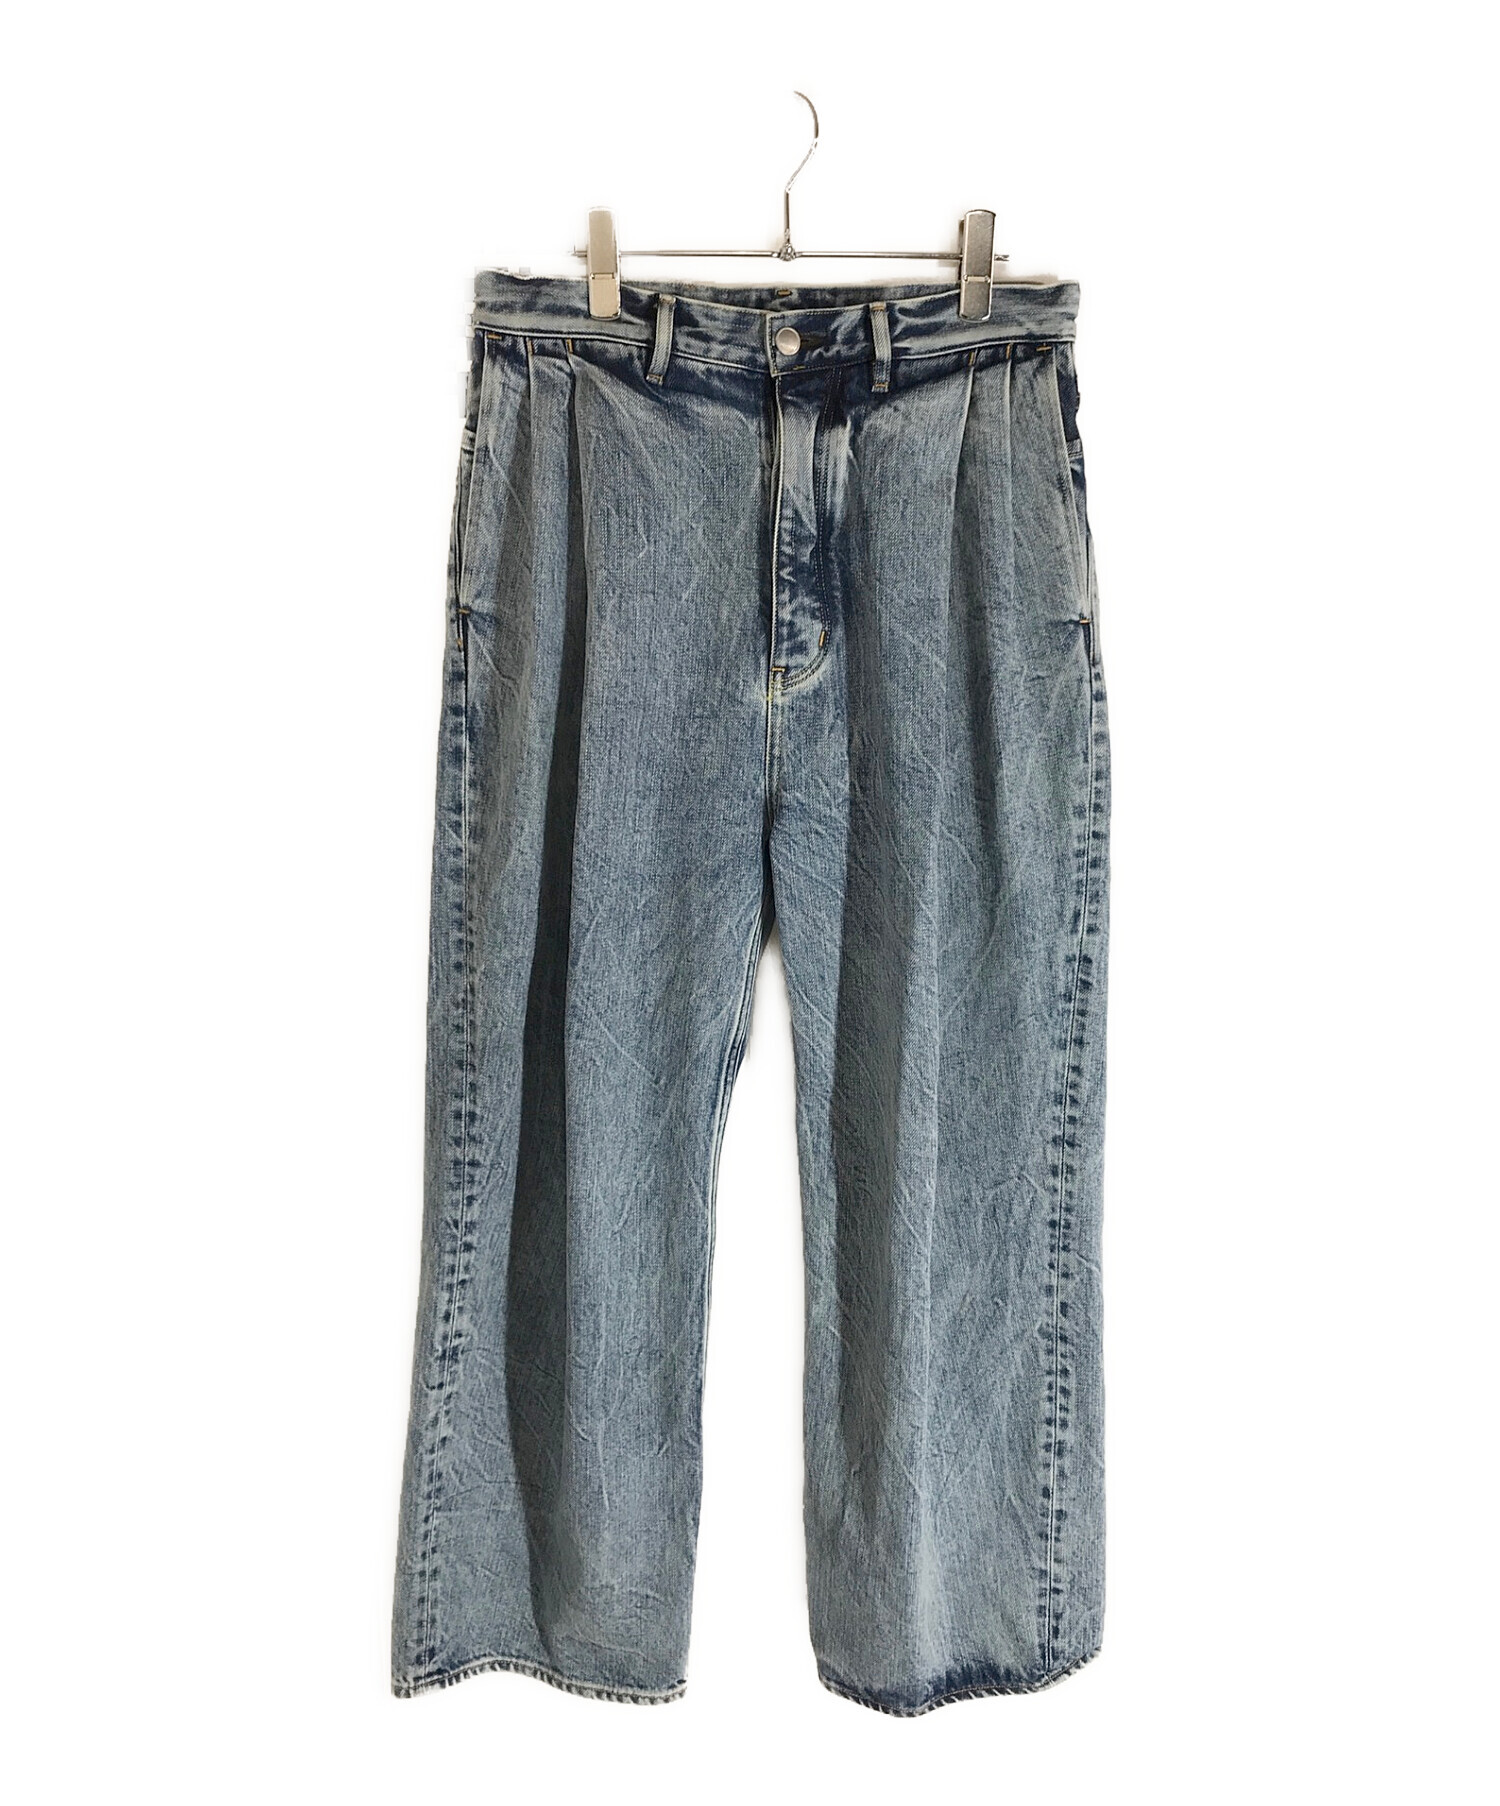 SUBLATIONSSUBLATIONS 2TUCK WIDE DENIM PANTS size1